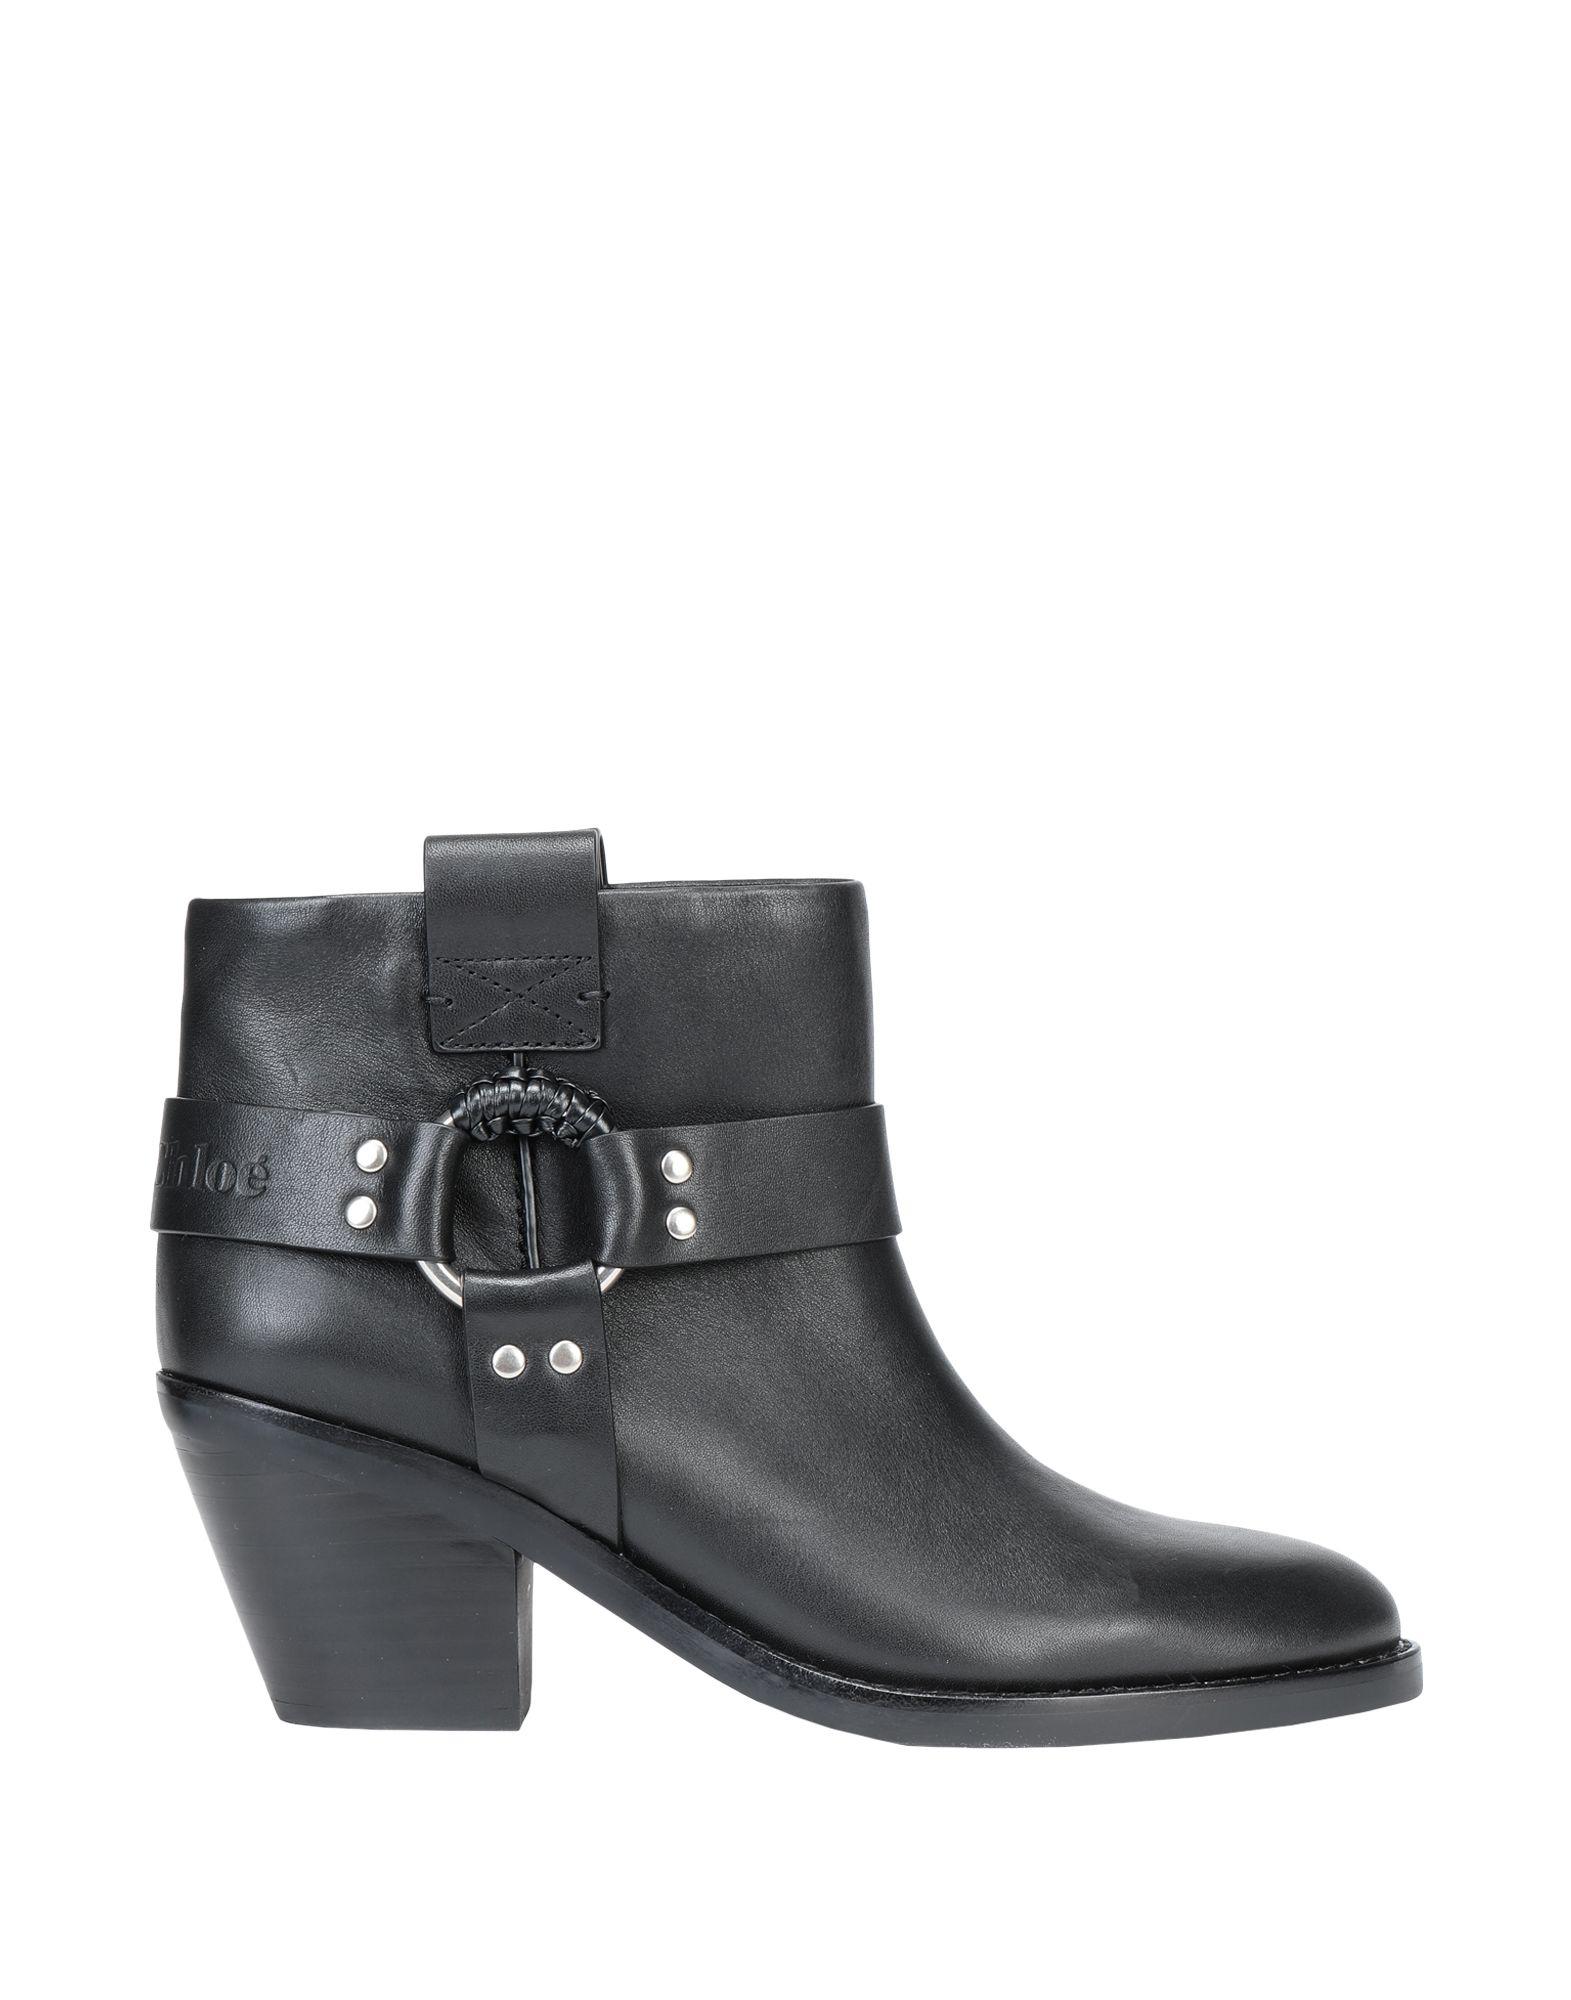 See By Chloé Ankle Boots in Black - Lyst